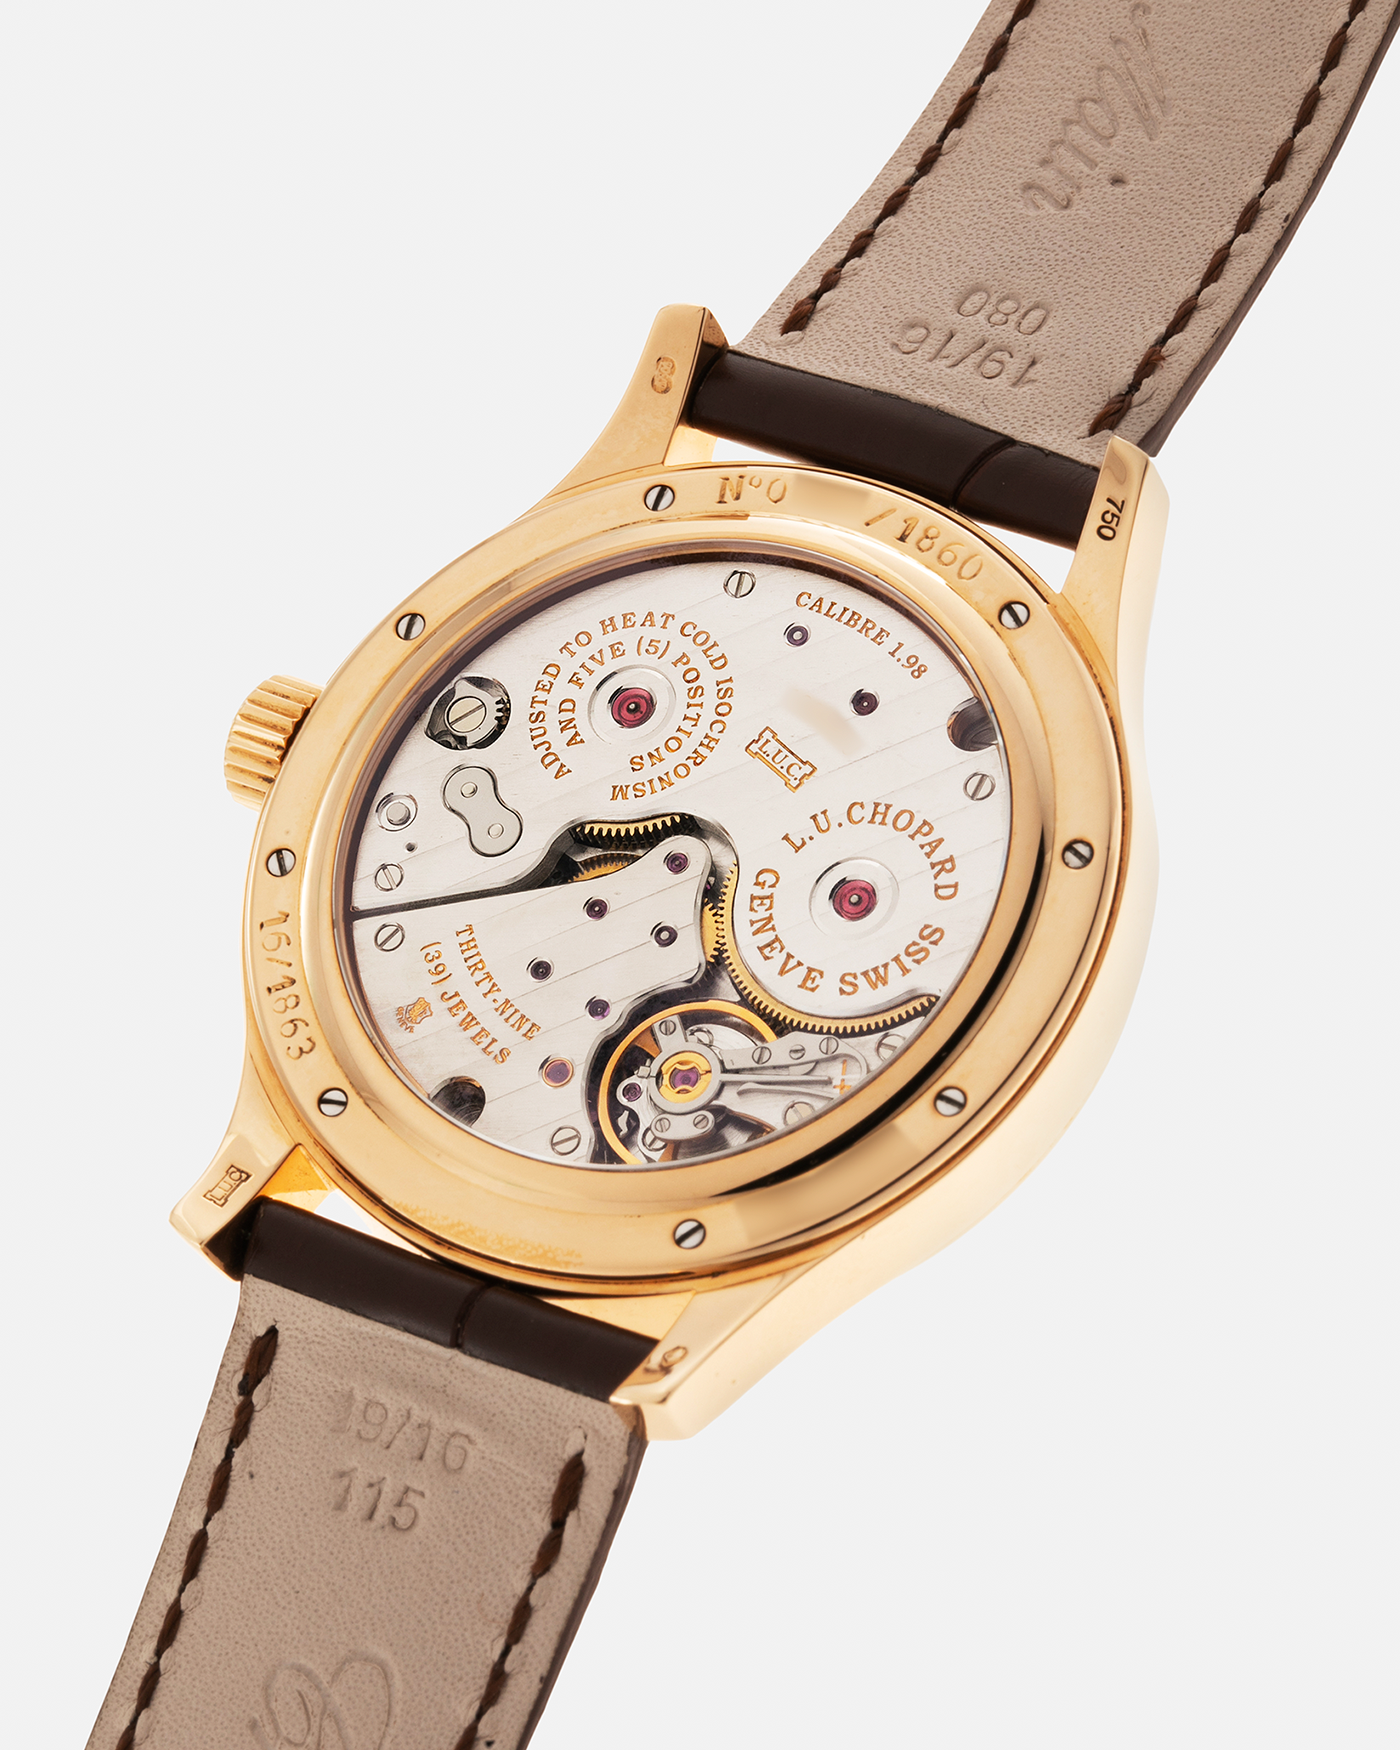 Brand: Chopard L.U.C. Year: 1990’s Model / Reference: 16/1863 ‘Quattro’ Material: 18-carat Yellow Gold Movement: Chopard Cal. 1.98, Manual-Winding Case Diameter: 38mm Lug Width: 19mm Strap: Chopard Brown Alligator Leather Strap with Signed 18-carat Yellow Gold Tang Buckle